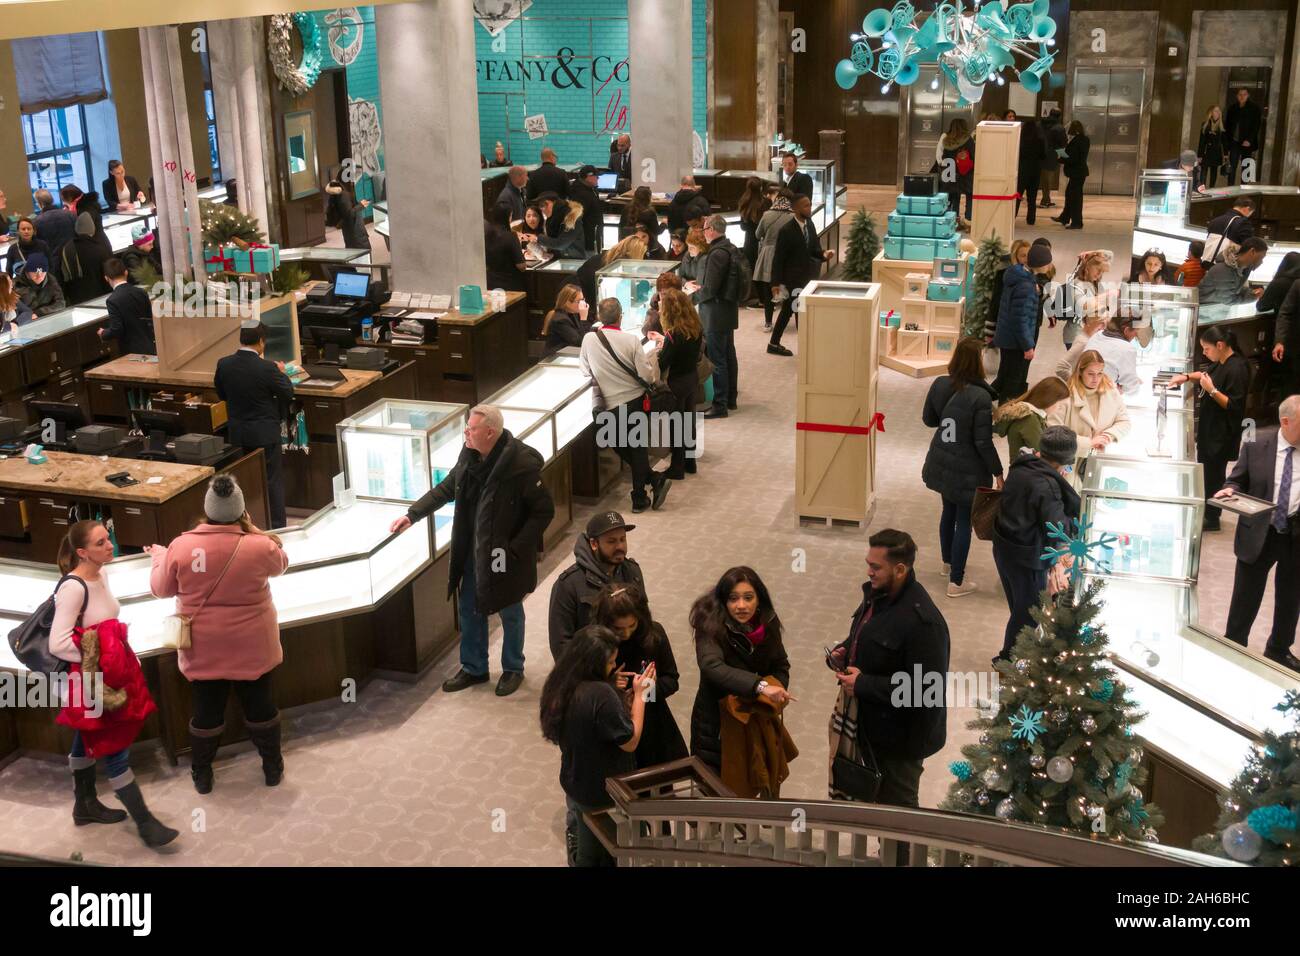 Tiffanys new york hi-res stock photography and images - Alamy